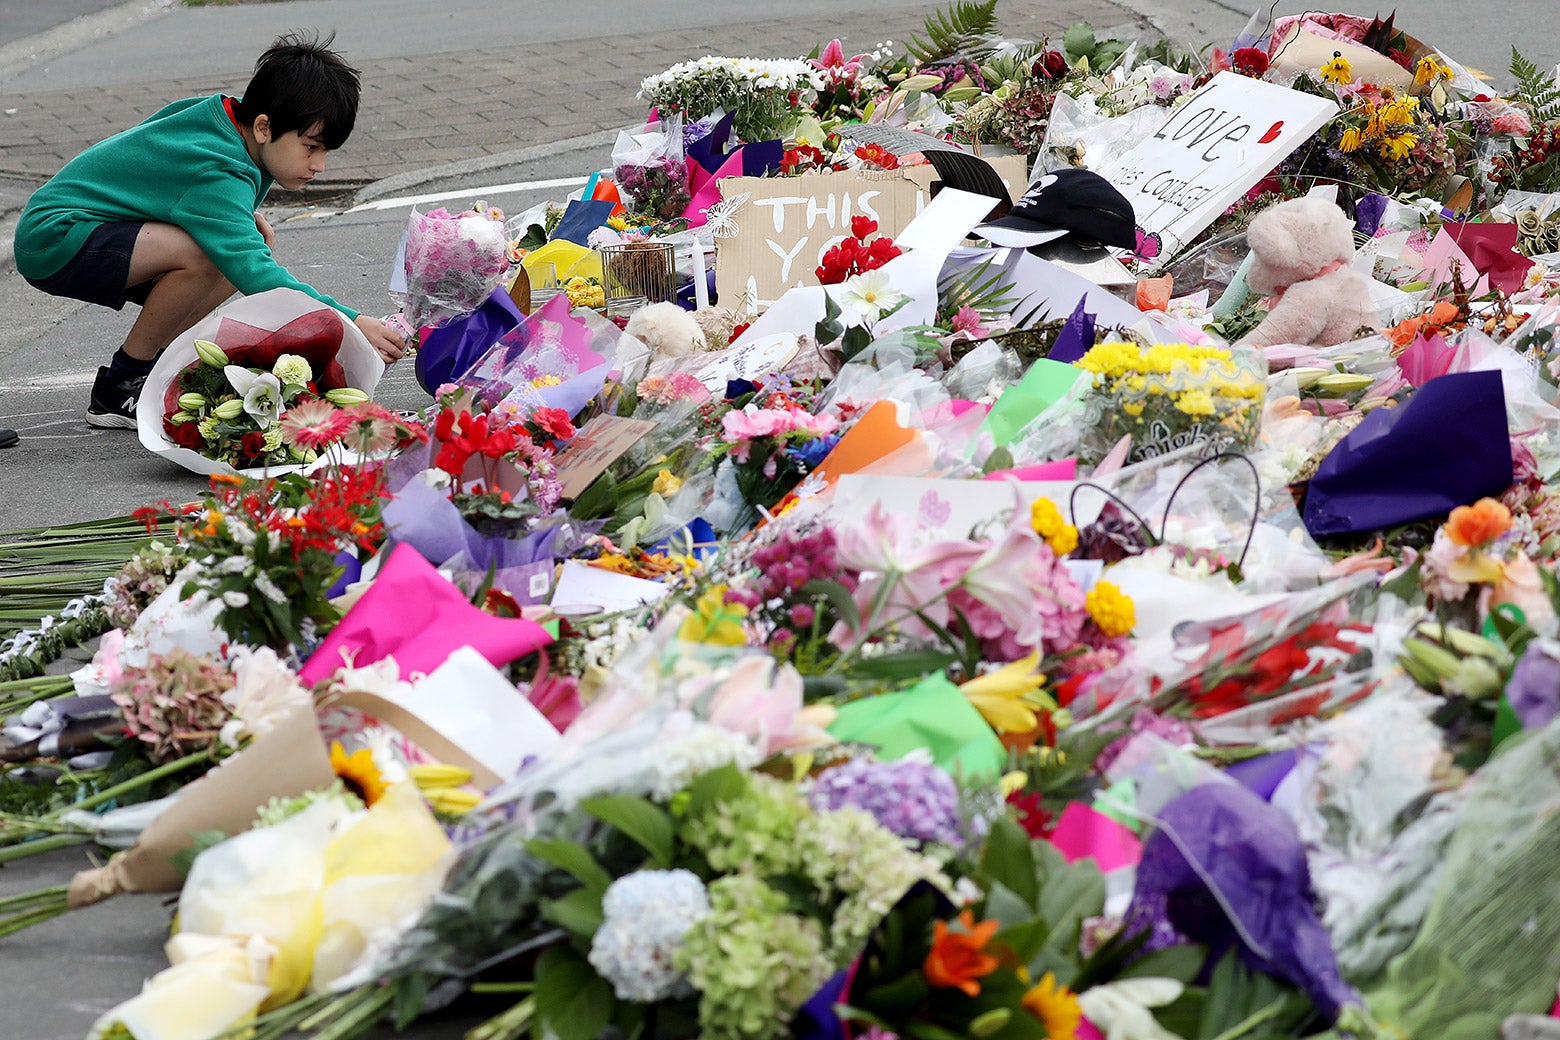 A little boy places flowers at a memorial to the Christchurch shooting victims.